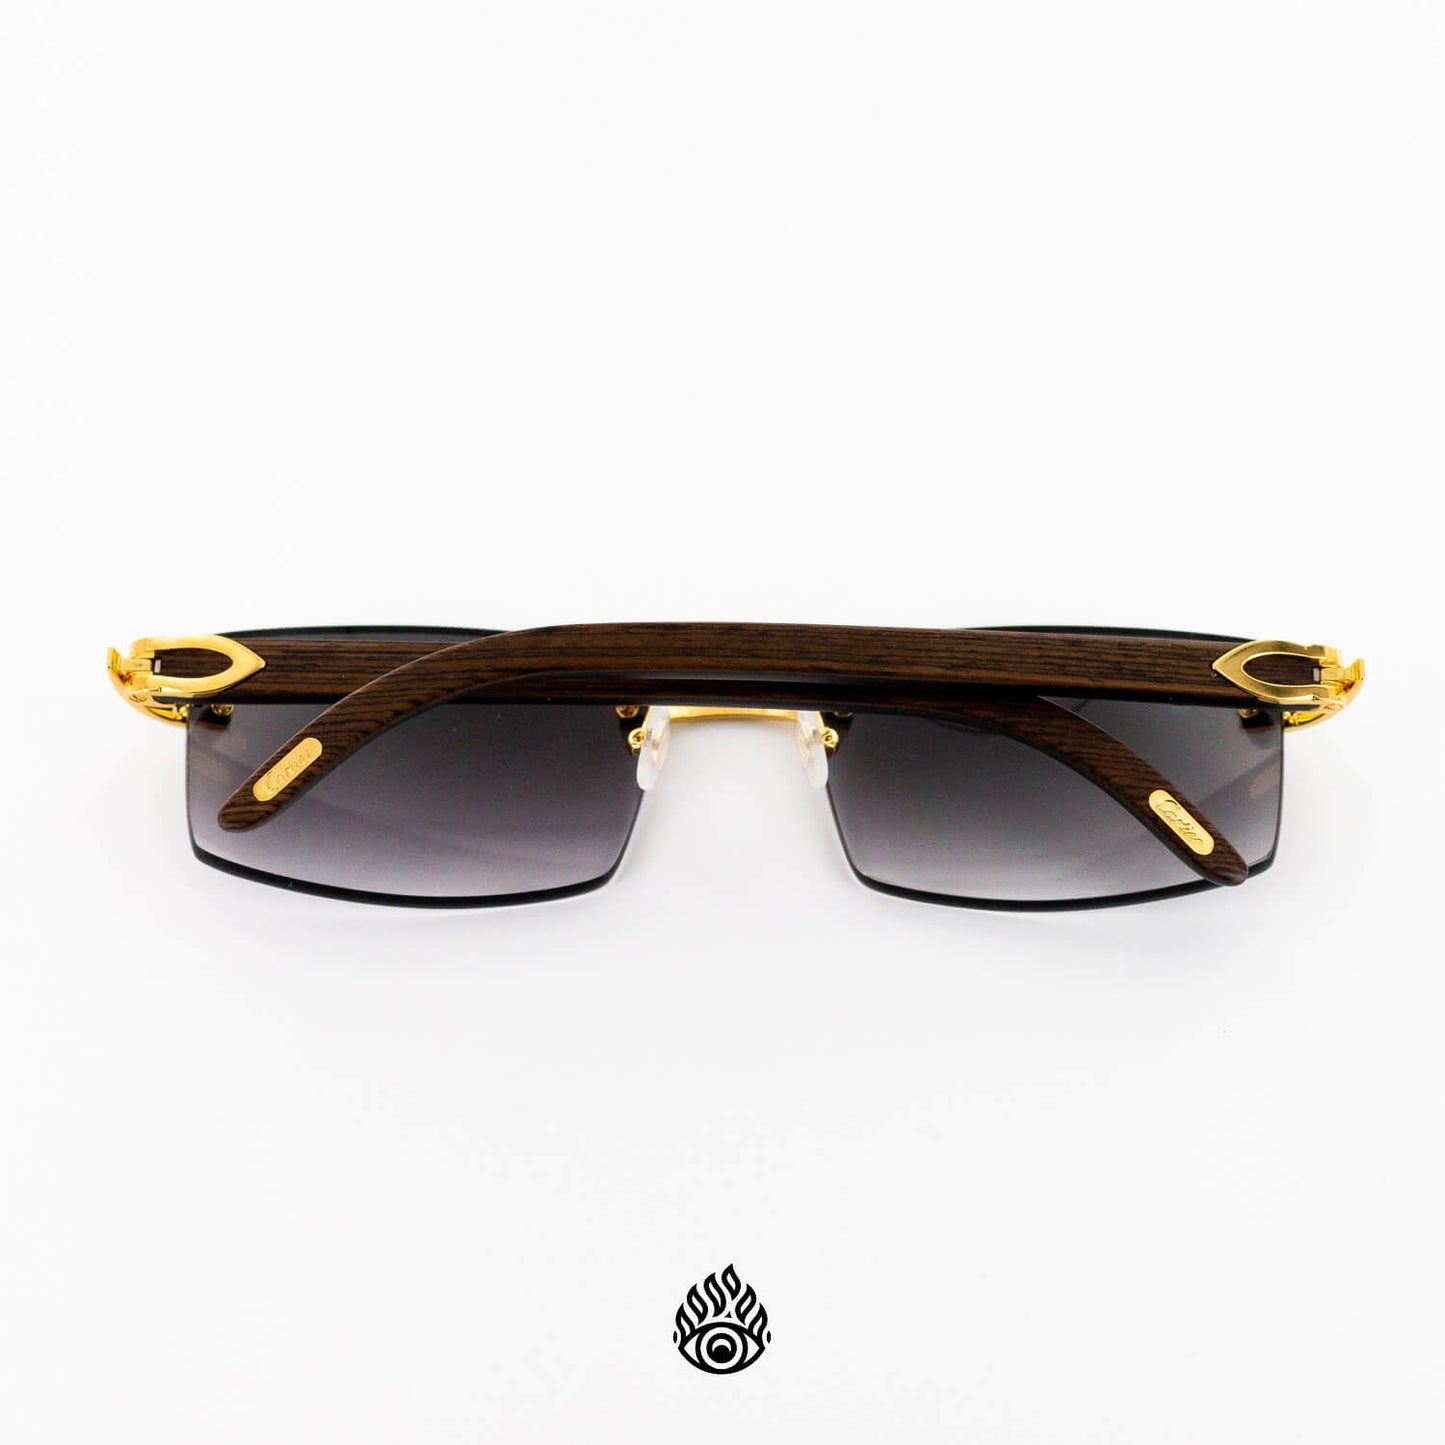 Cartier Dark Wood Glasses with Gold C Decor and Grey Lens